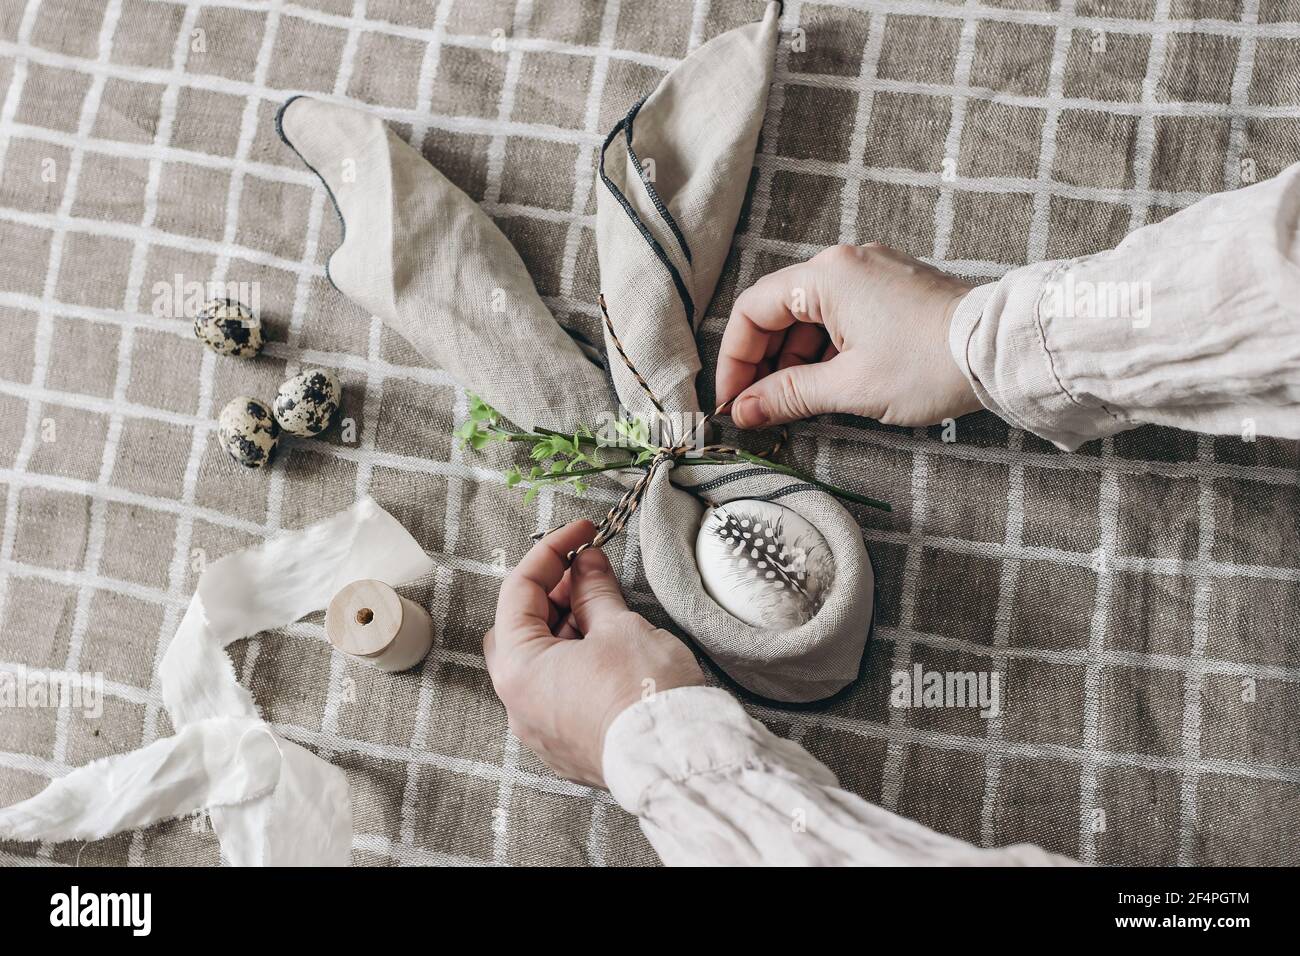 Closeup of womans hands folding napkins. Easter decorative table setting. Spring still life with quail and hen eggs. Beige linen table cloth Stock Photo